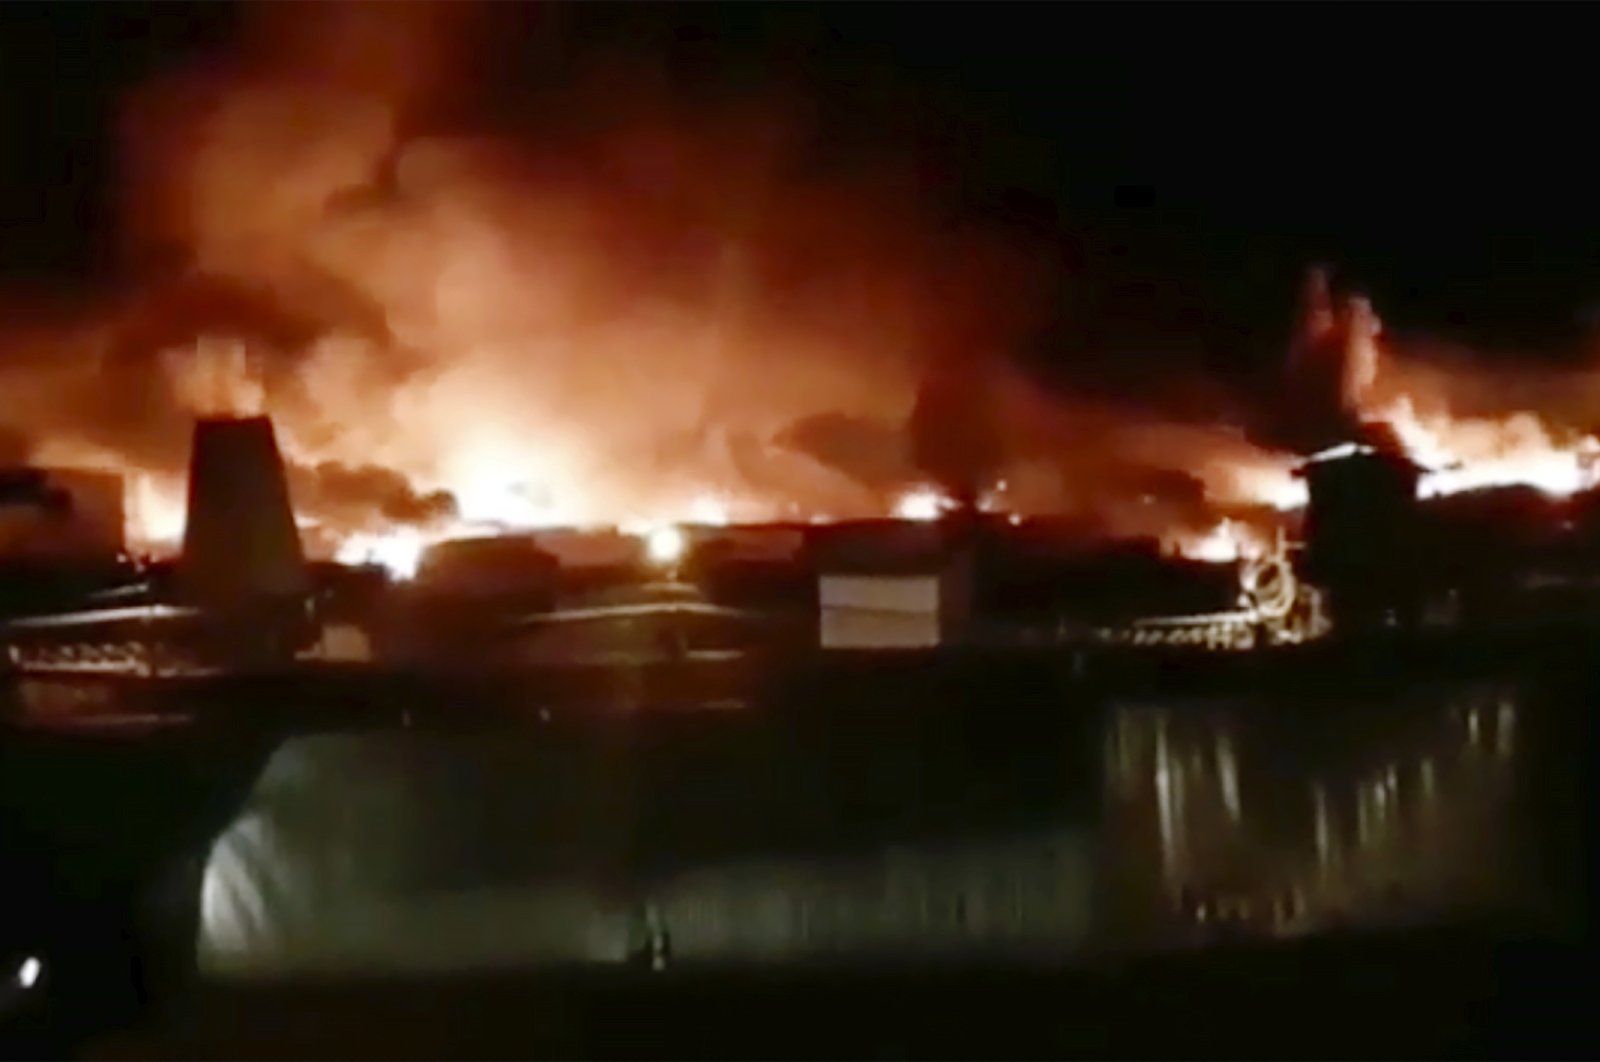 In this image taken from video provided by Instagram account @incident.38, a fire is blazing at a prison colony where inmates and guards have clashed in Angarsk, 4,000 kilometers (2,500 miles) east of Moscow, Friday, April 10, 2020. Russian officials say a large fire is blazing at a prison in Siberia where inmates and guards have clashed. There was no official information about casualties or damage Friday, but Pavel Glushenko, a local human rights activist, said on social media that “full-scale hostilities” were taking place at the maximum-security prison. (AP Photo)